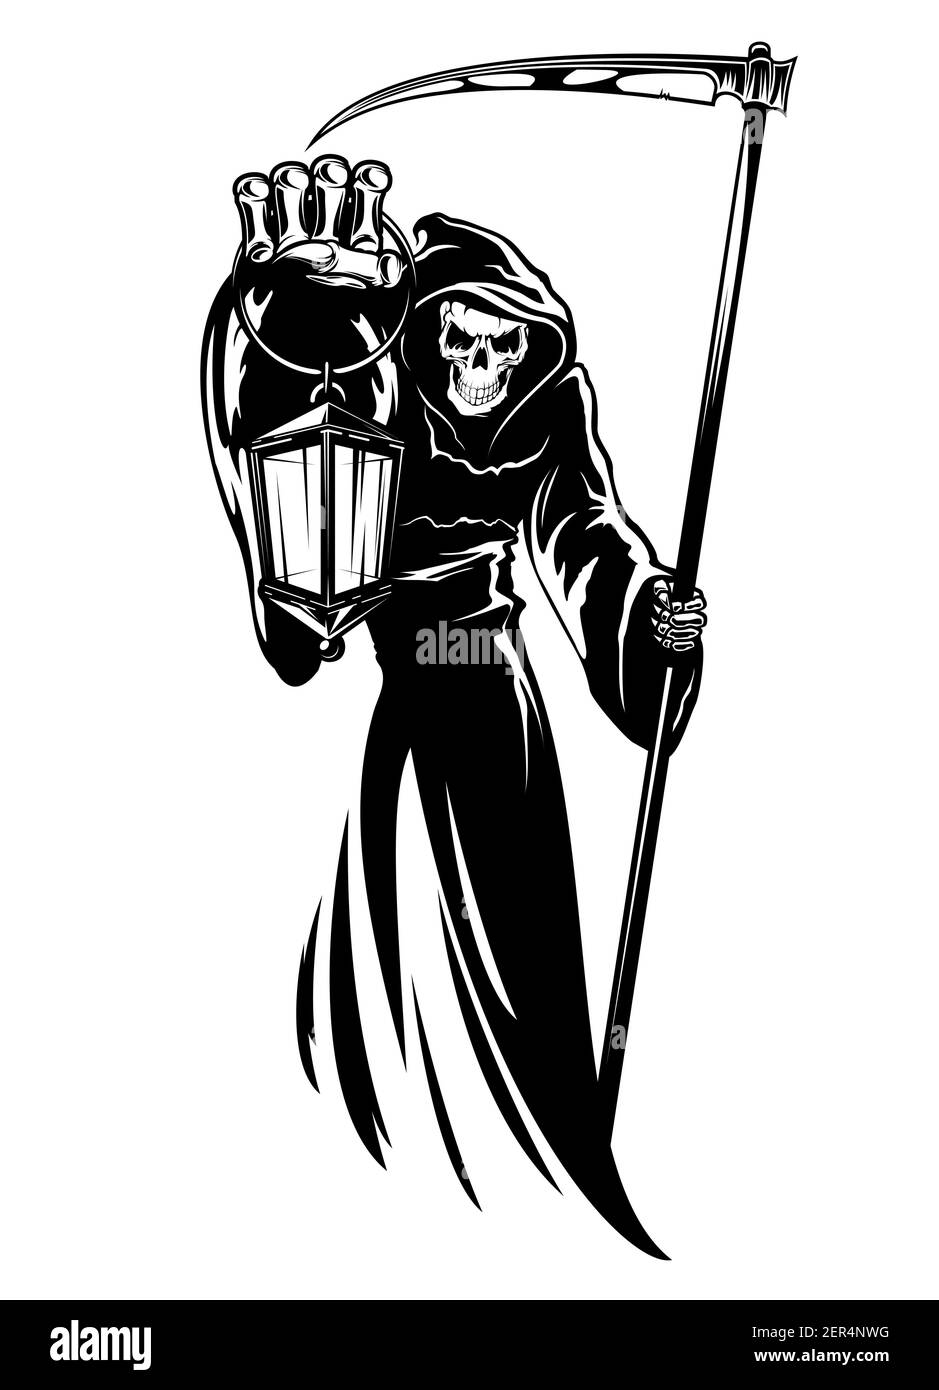 Reaper with scythe and lantern. Grim death wearing black chlamydia with hood. Skeleton character in cape for Halloween, religion symbol, tattoo design Stock Vector